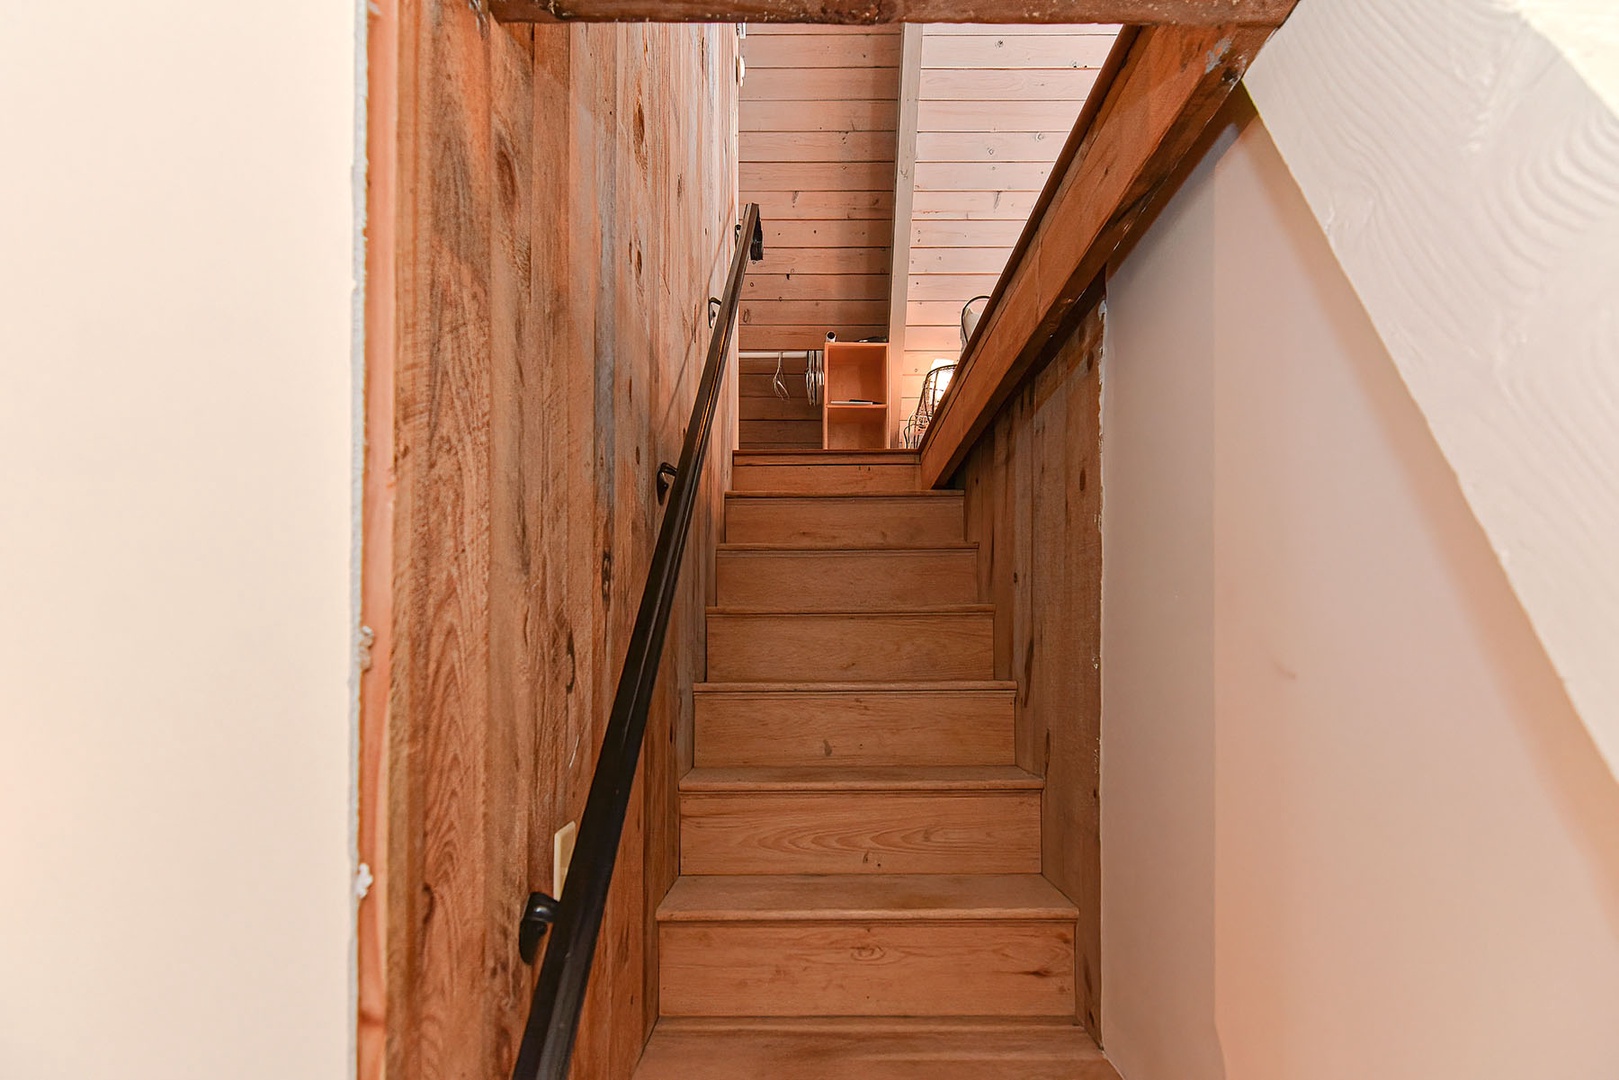 The staircase up to the second floor/loft. loft